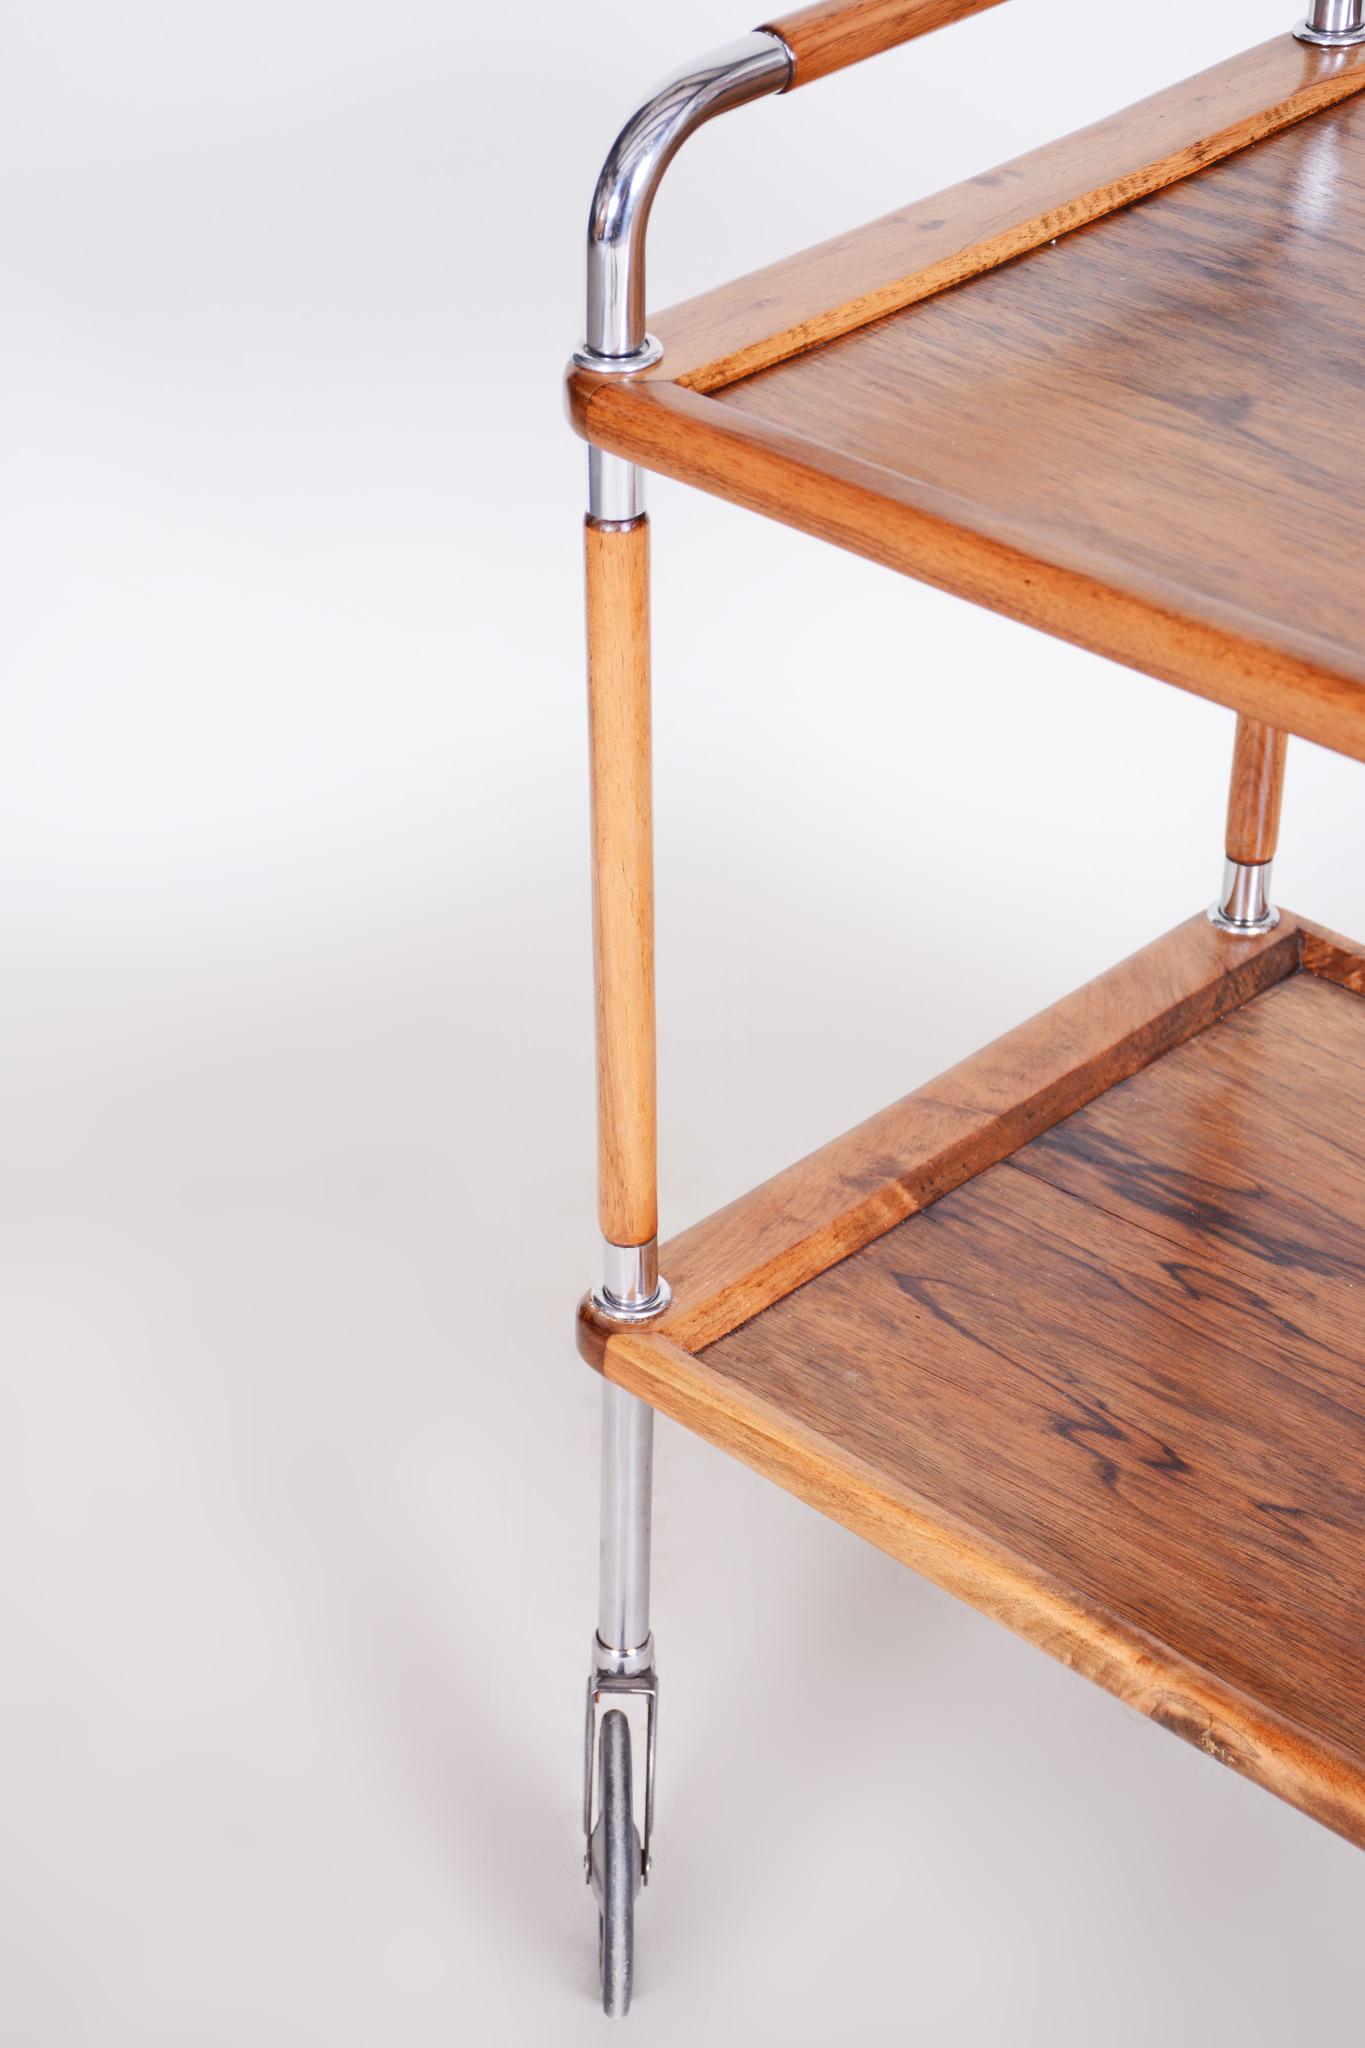 Restored Art Deco Serving Trolley Made in the 1930s by Thonet, Walnut and Steel For Sale 3